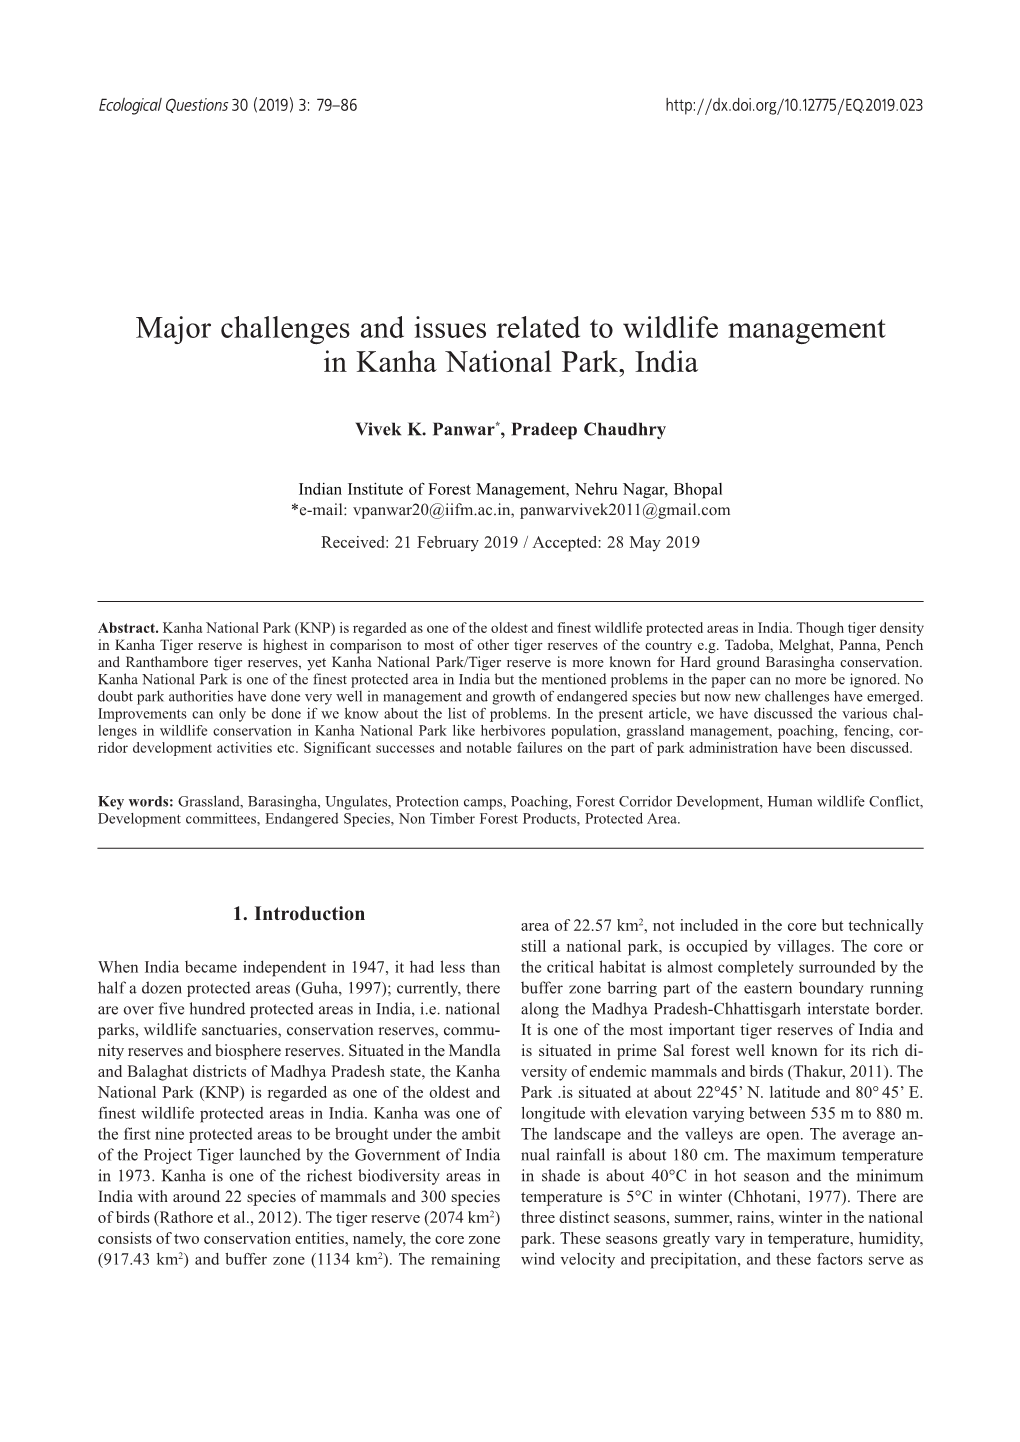 Major Challenges and Issues Related to Wildlife Management in Kanha National Park, India 81